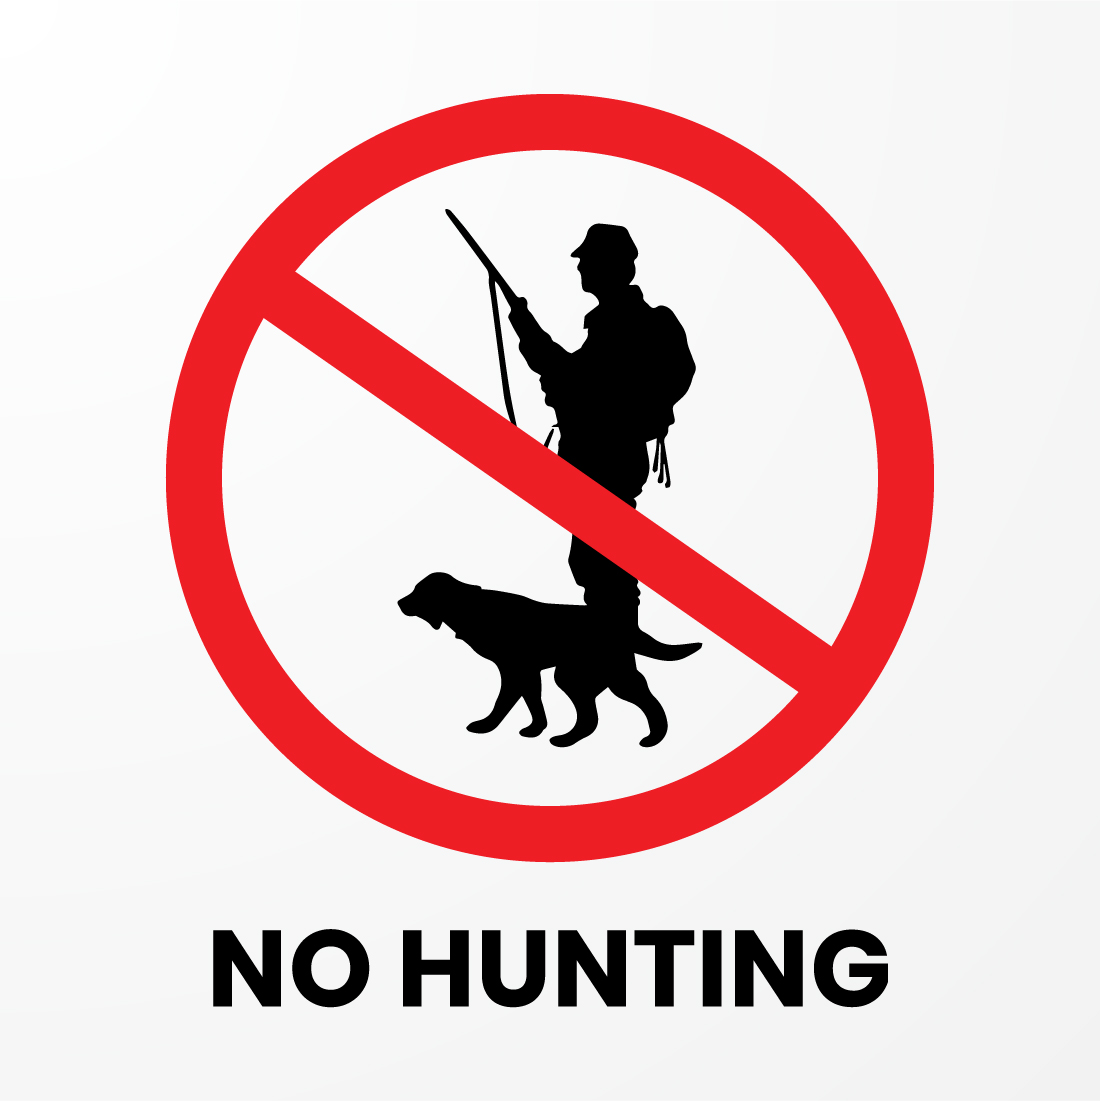 Prohibition Signs Sticker about hunting.